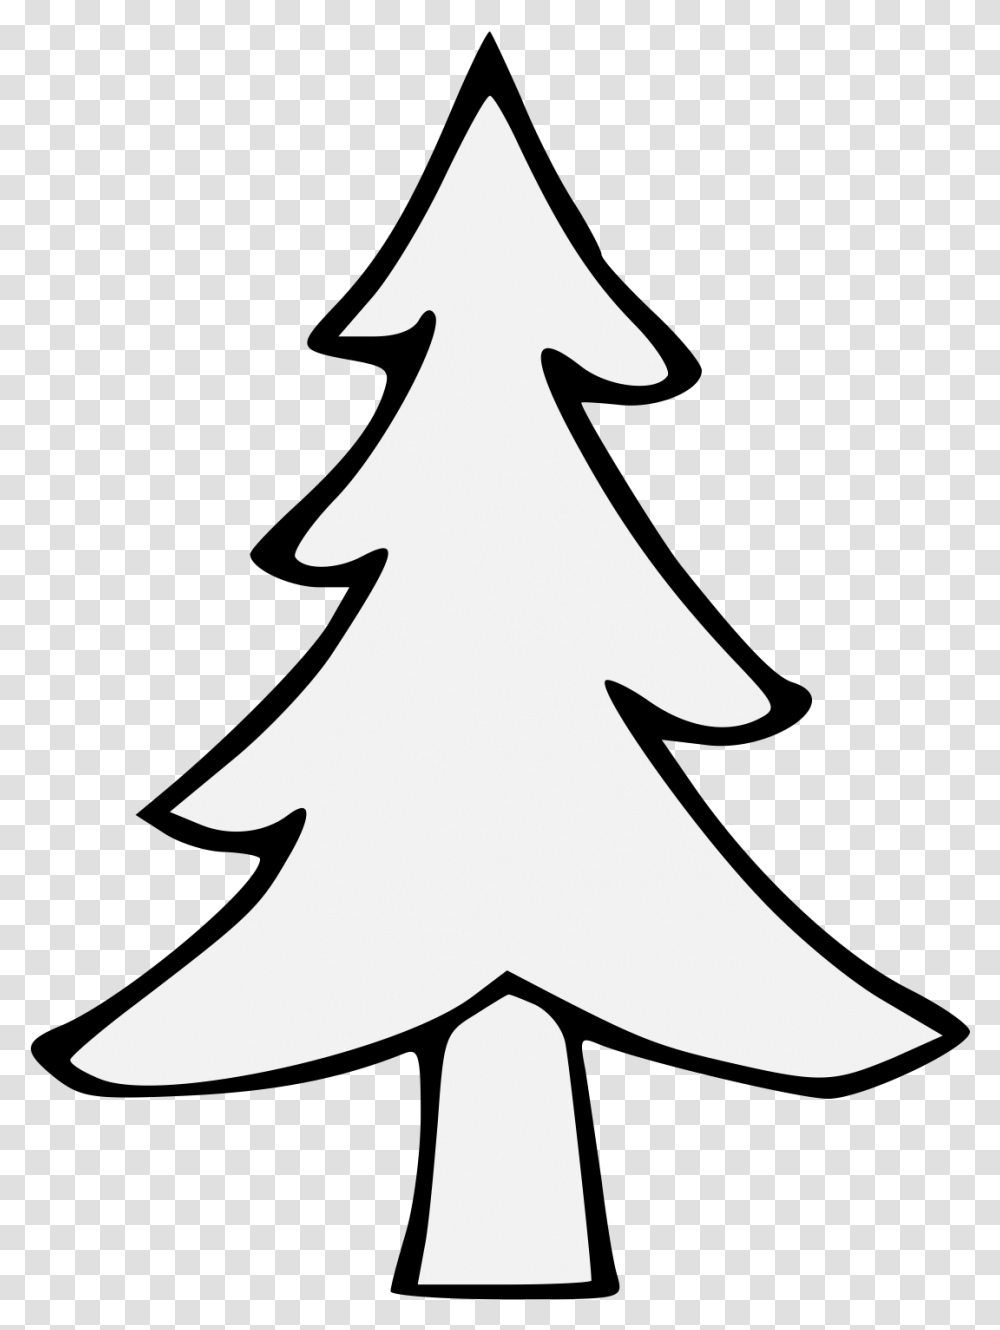 Download Hd Details Christmas Tree Pine Tree Heraldry, Star Symbol, Stencil, Plant, Silhouette Transparent Png